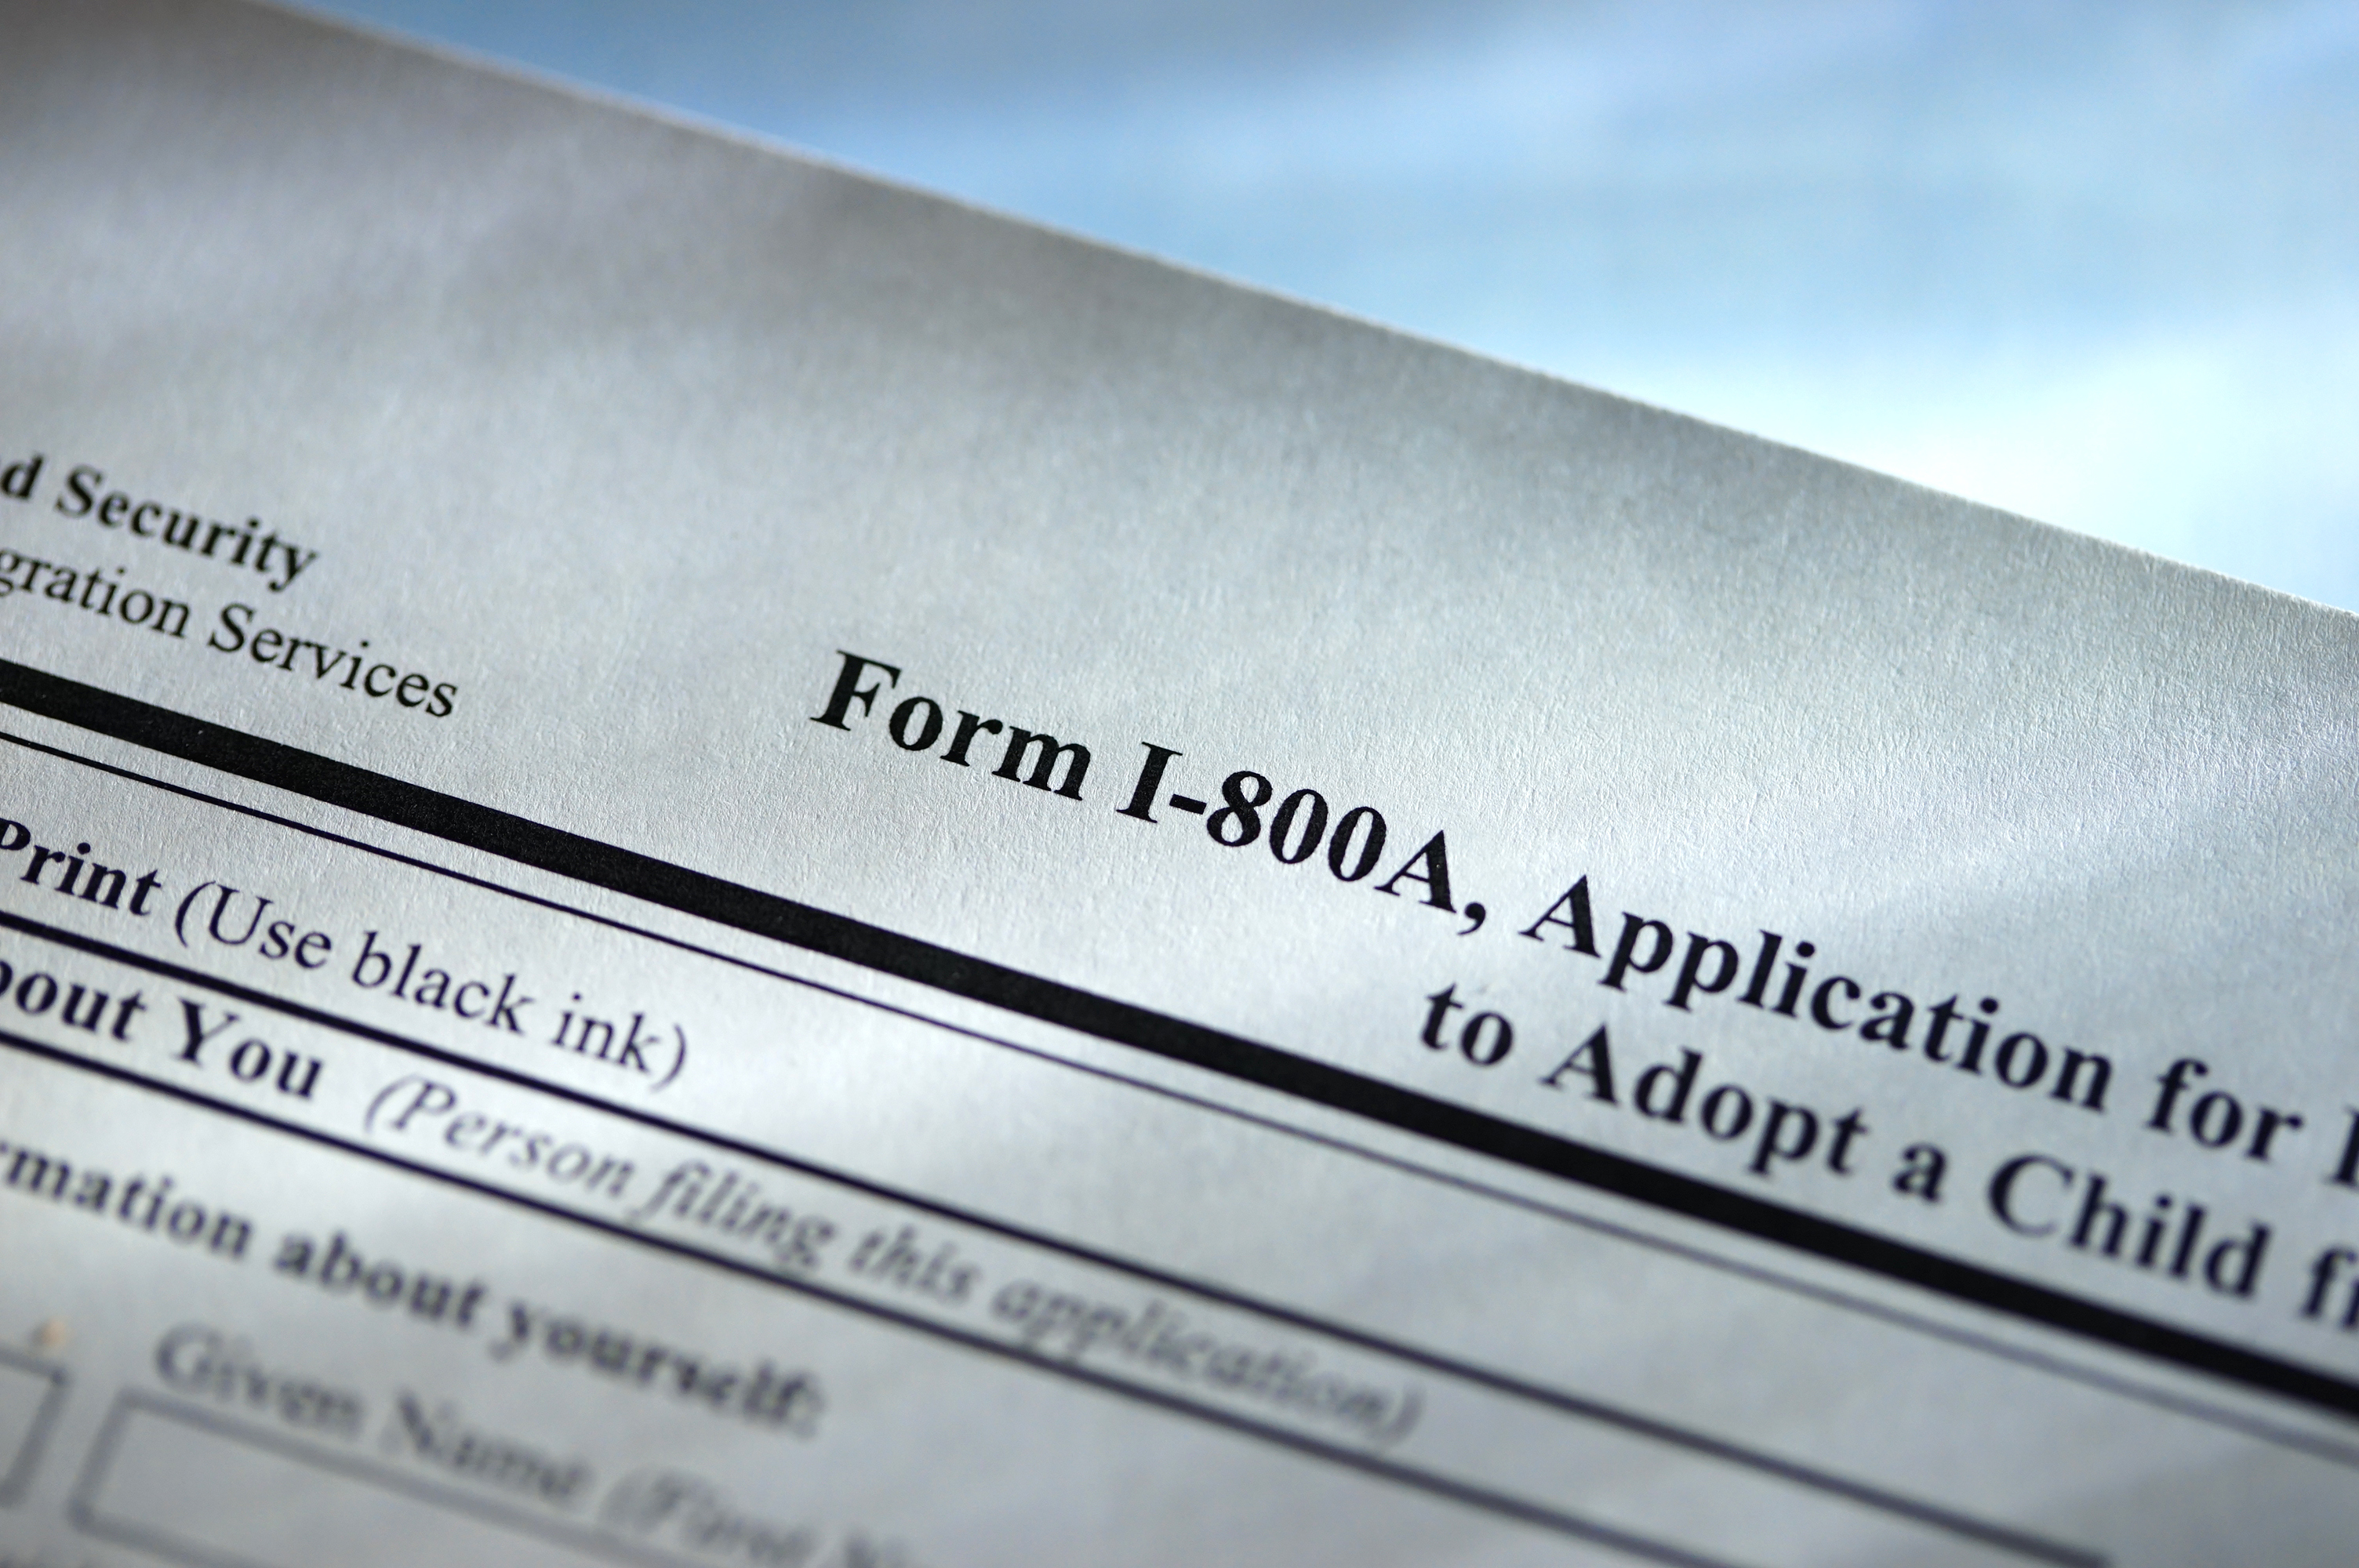 An adoption application form | Source: Getty Images